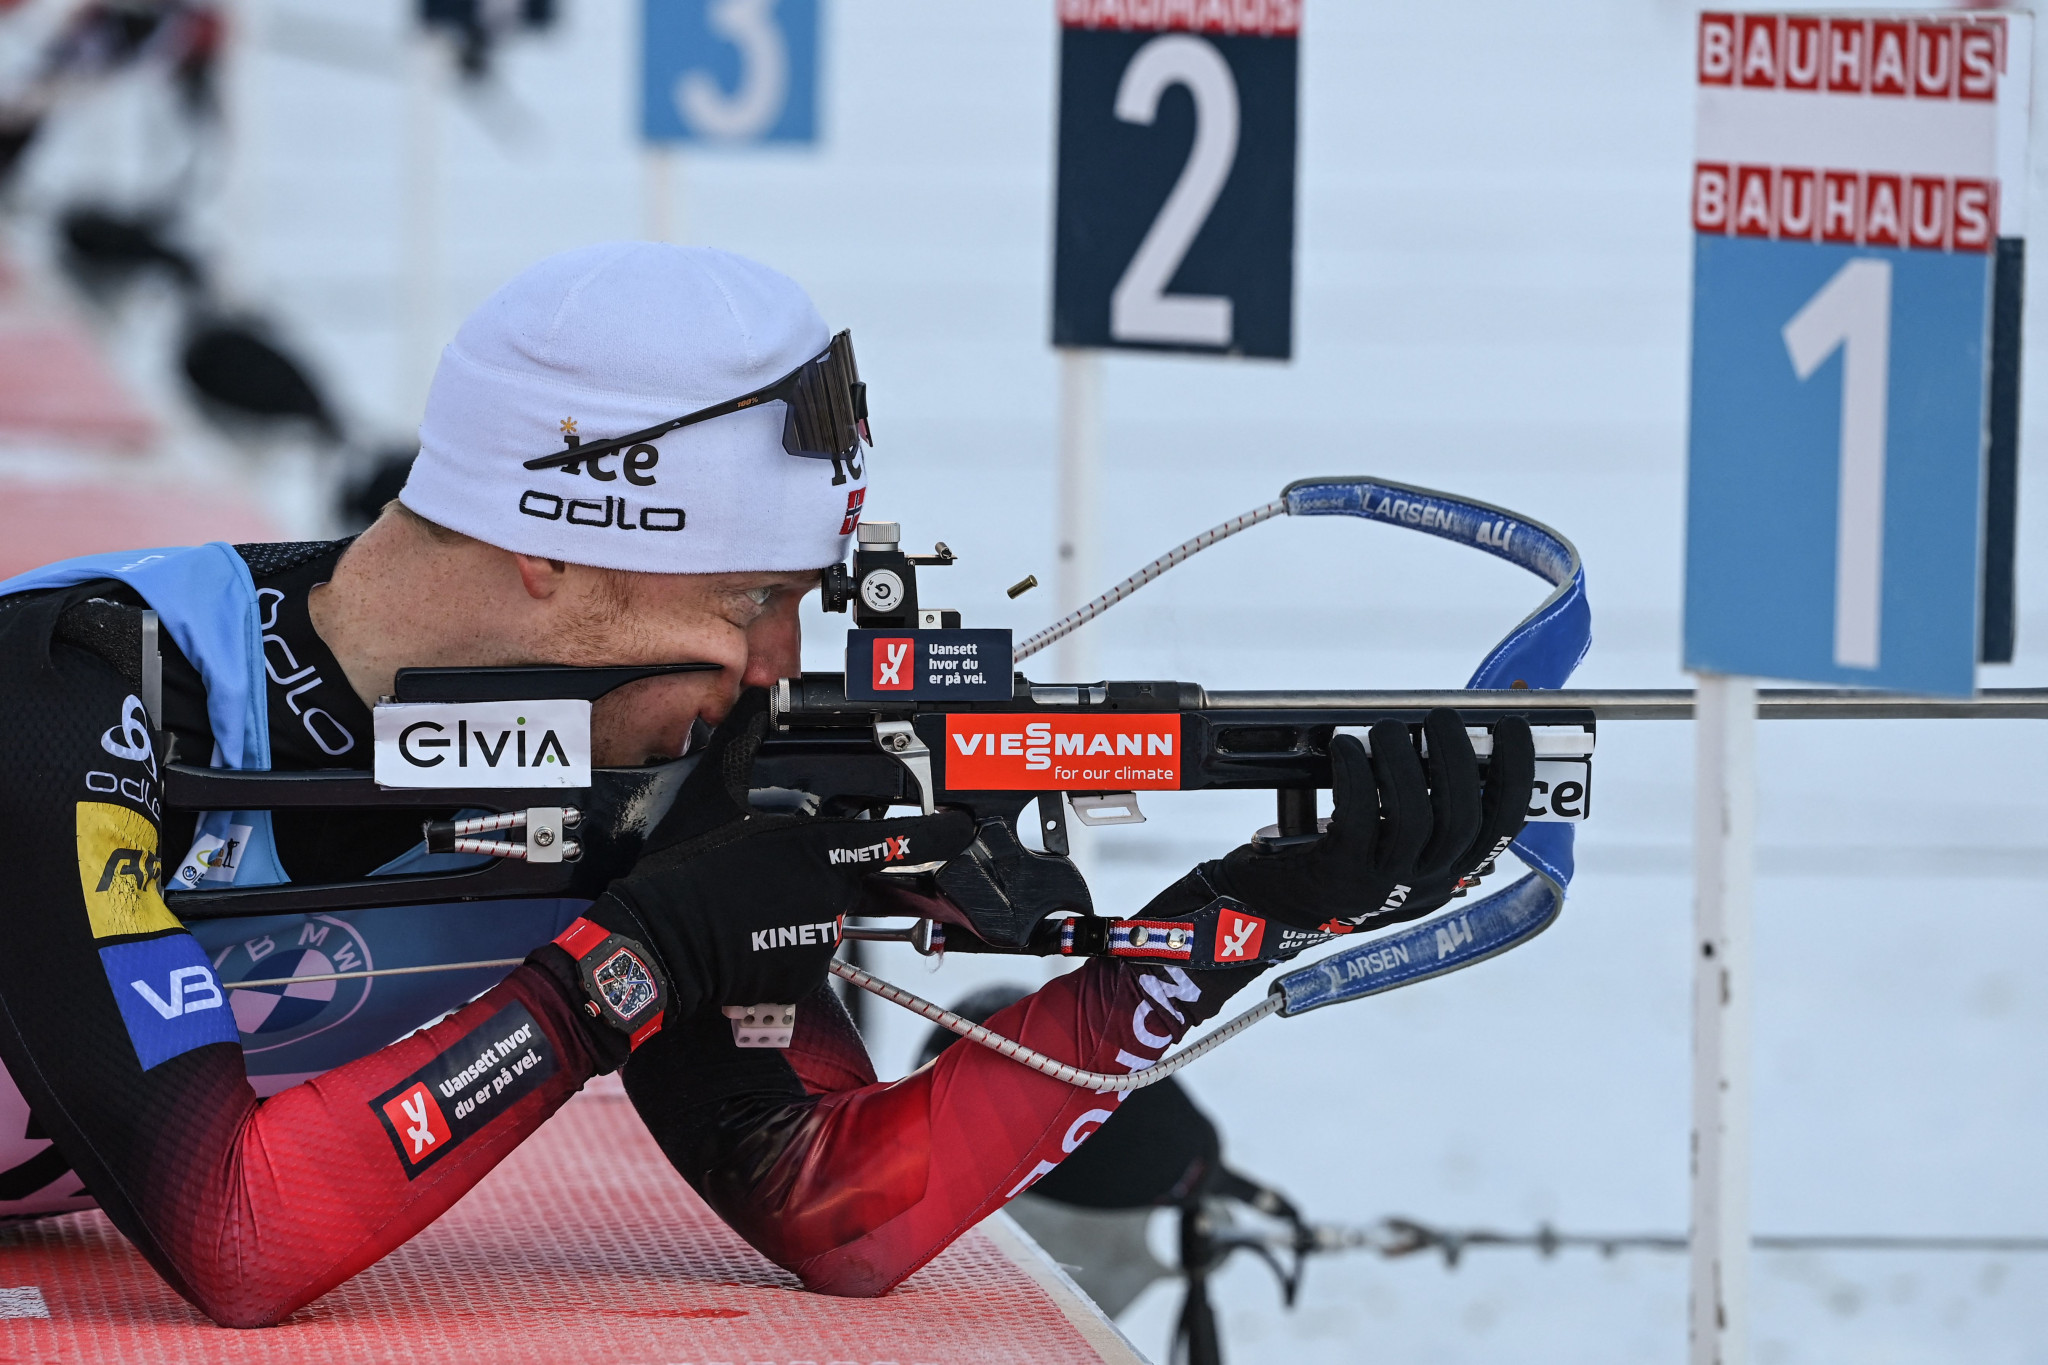 Defending Biathlon World Cup champion Bø breaks gold medal drought with sprint win